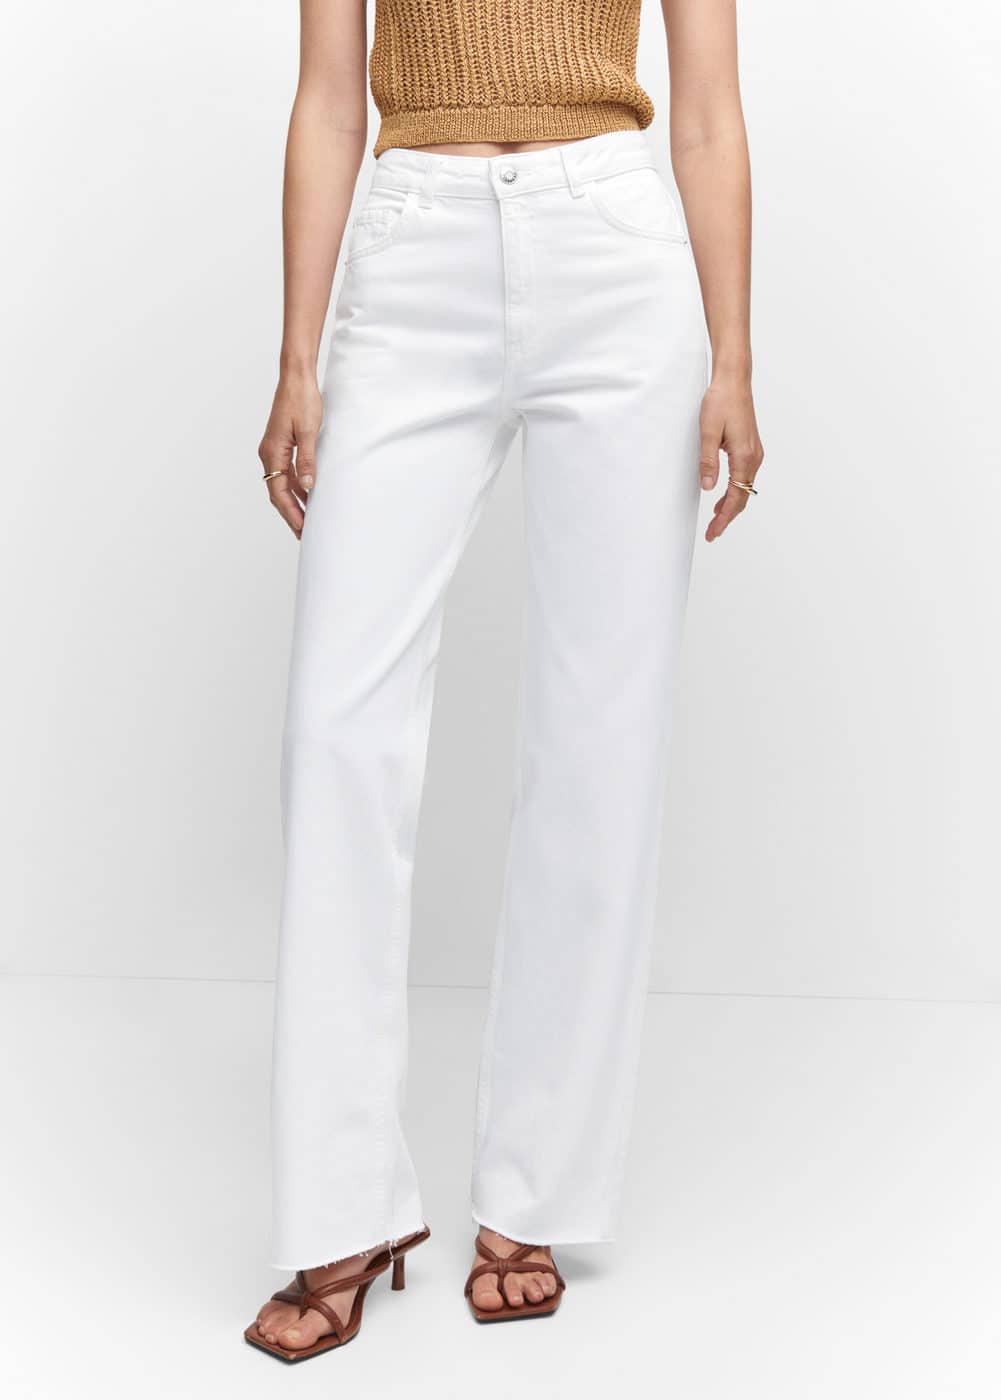 6 All-White Looks to Wear Before Summer's Over | Who What Wear